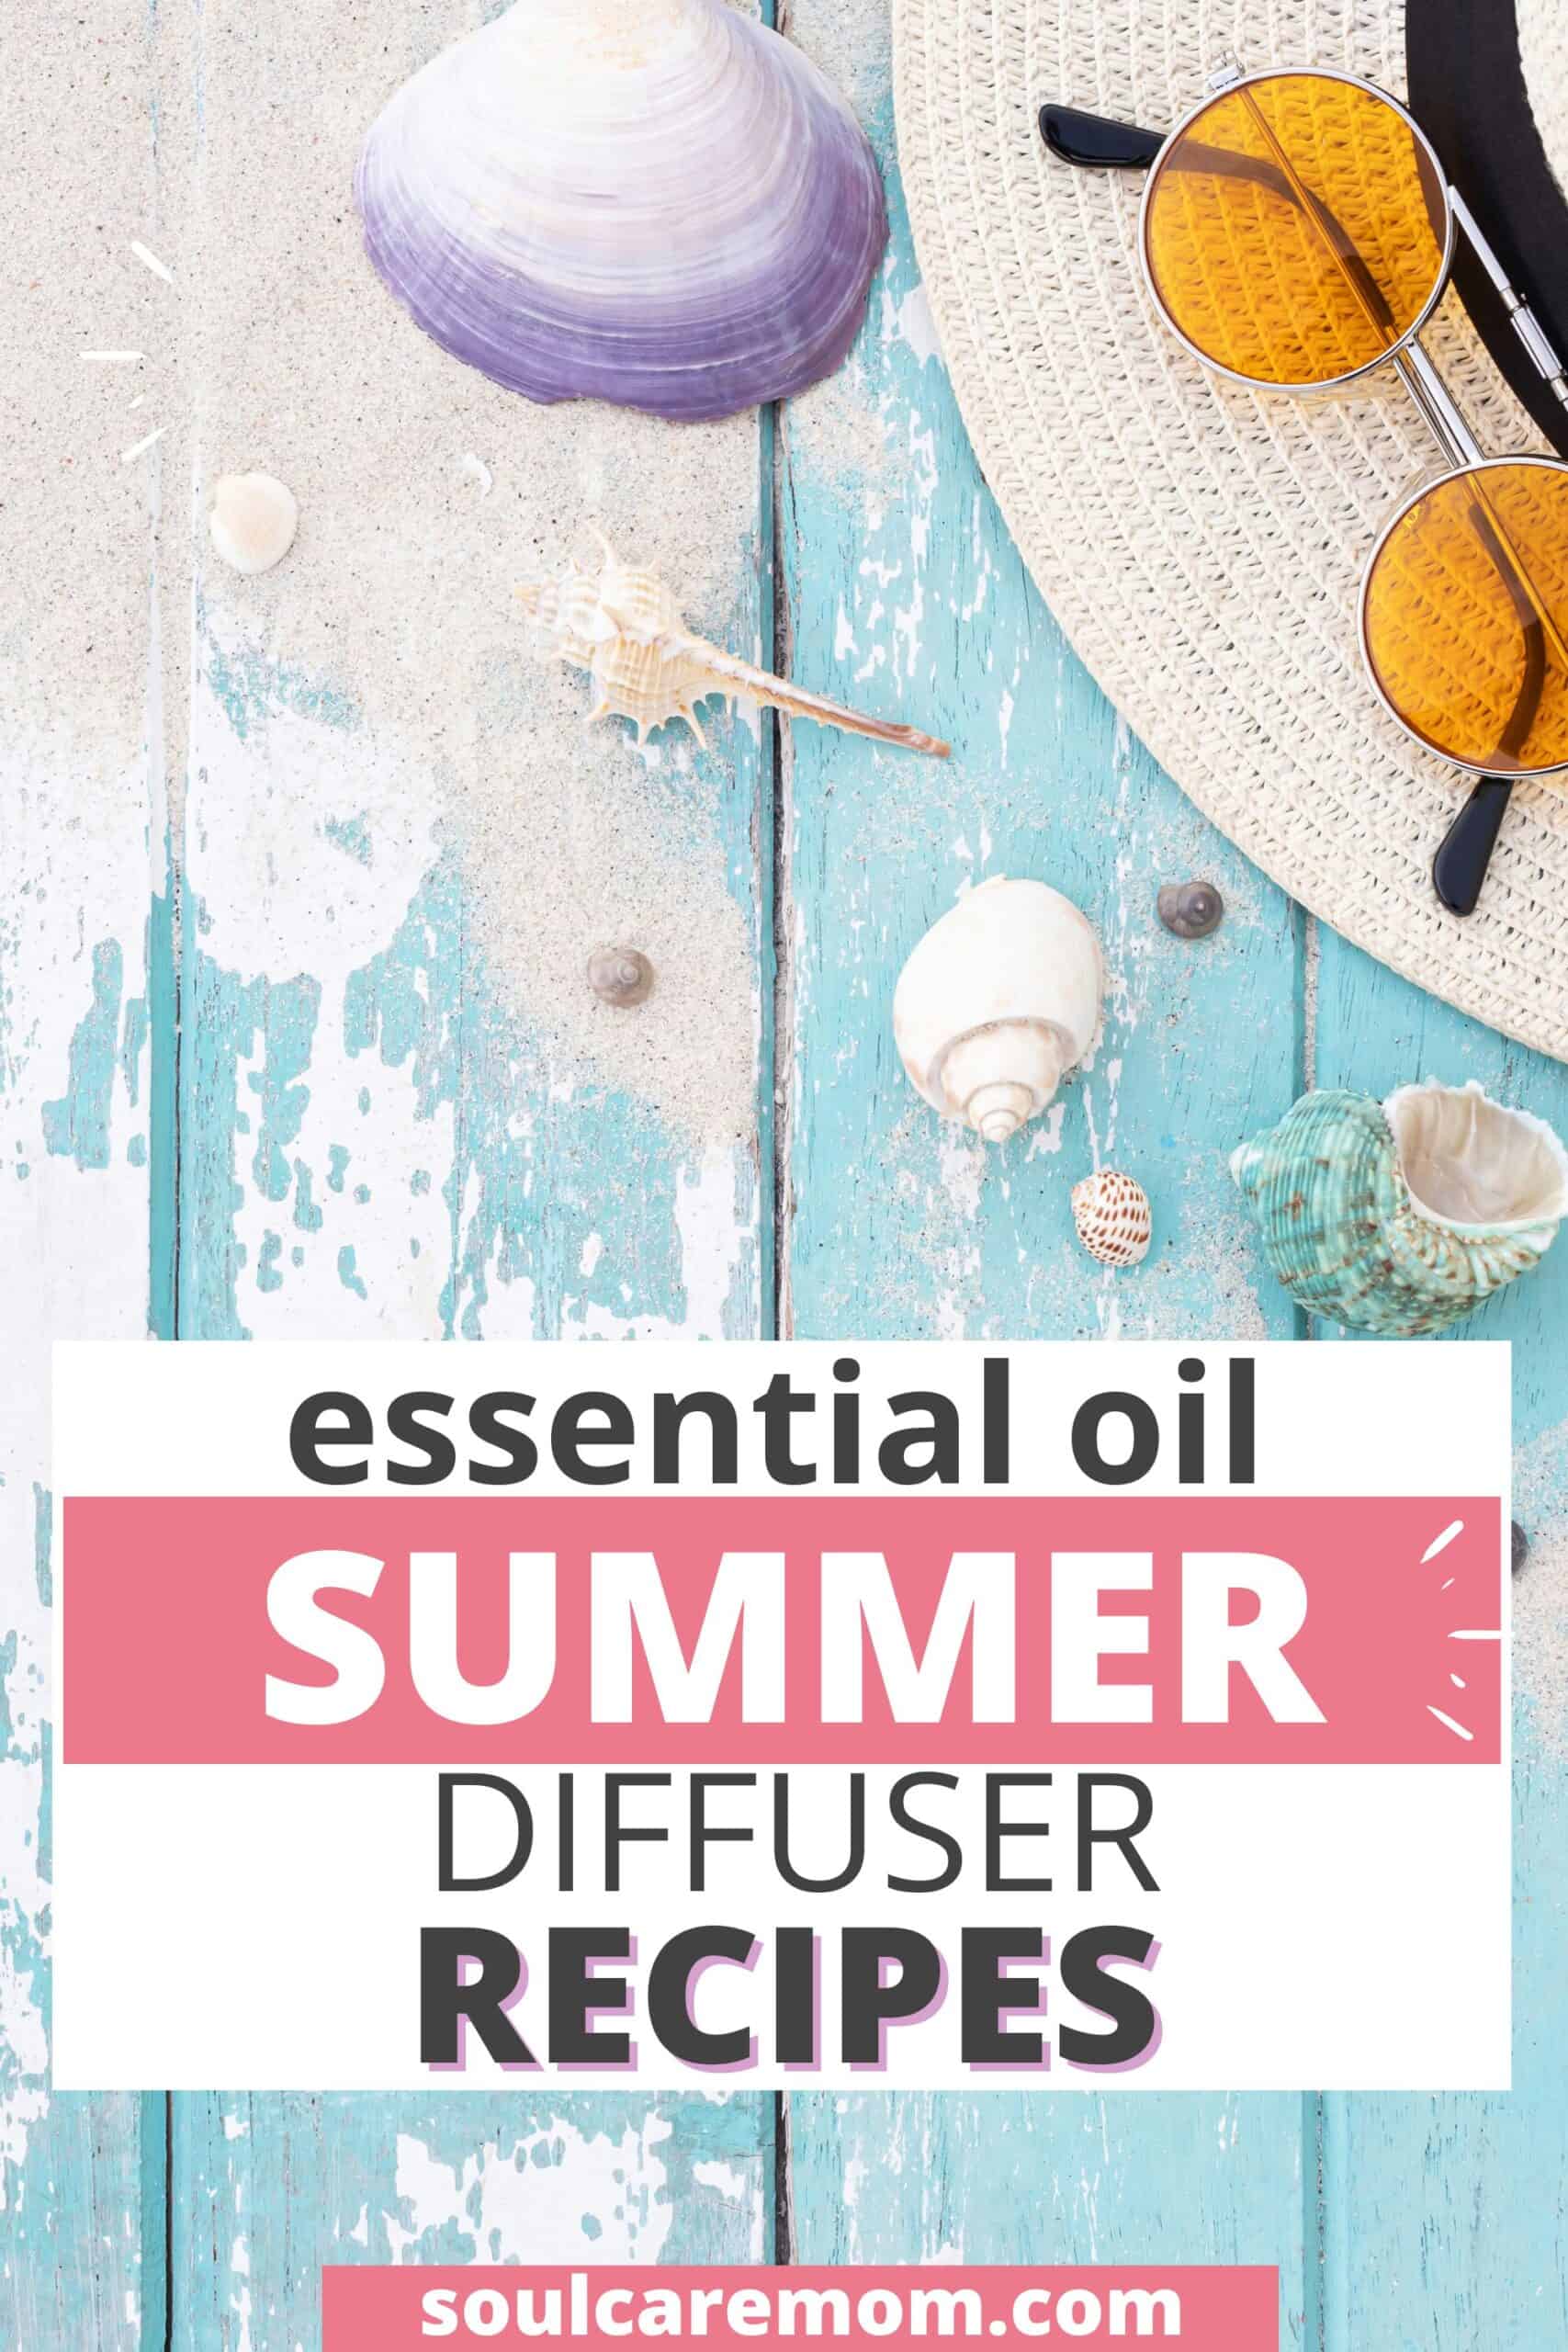 Essential Oil Summer Blends and Diffuser Recipes With sun hat sun glasses and sea shells